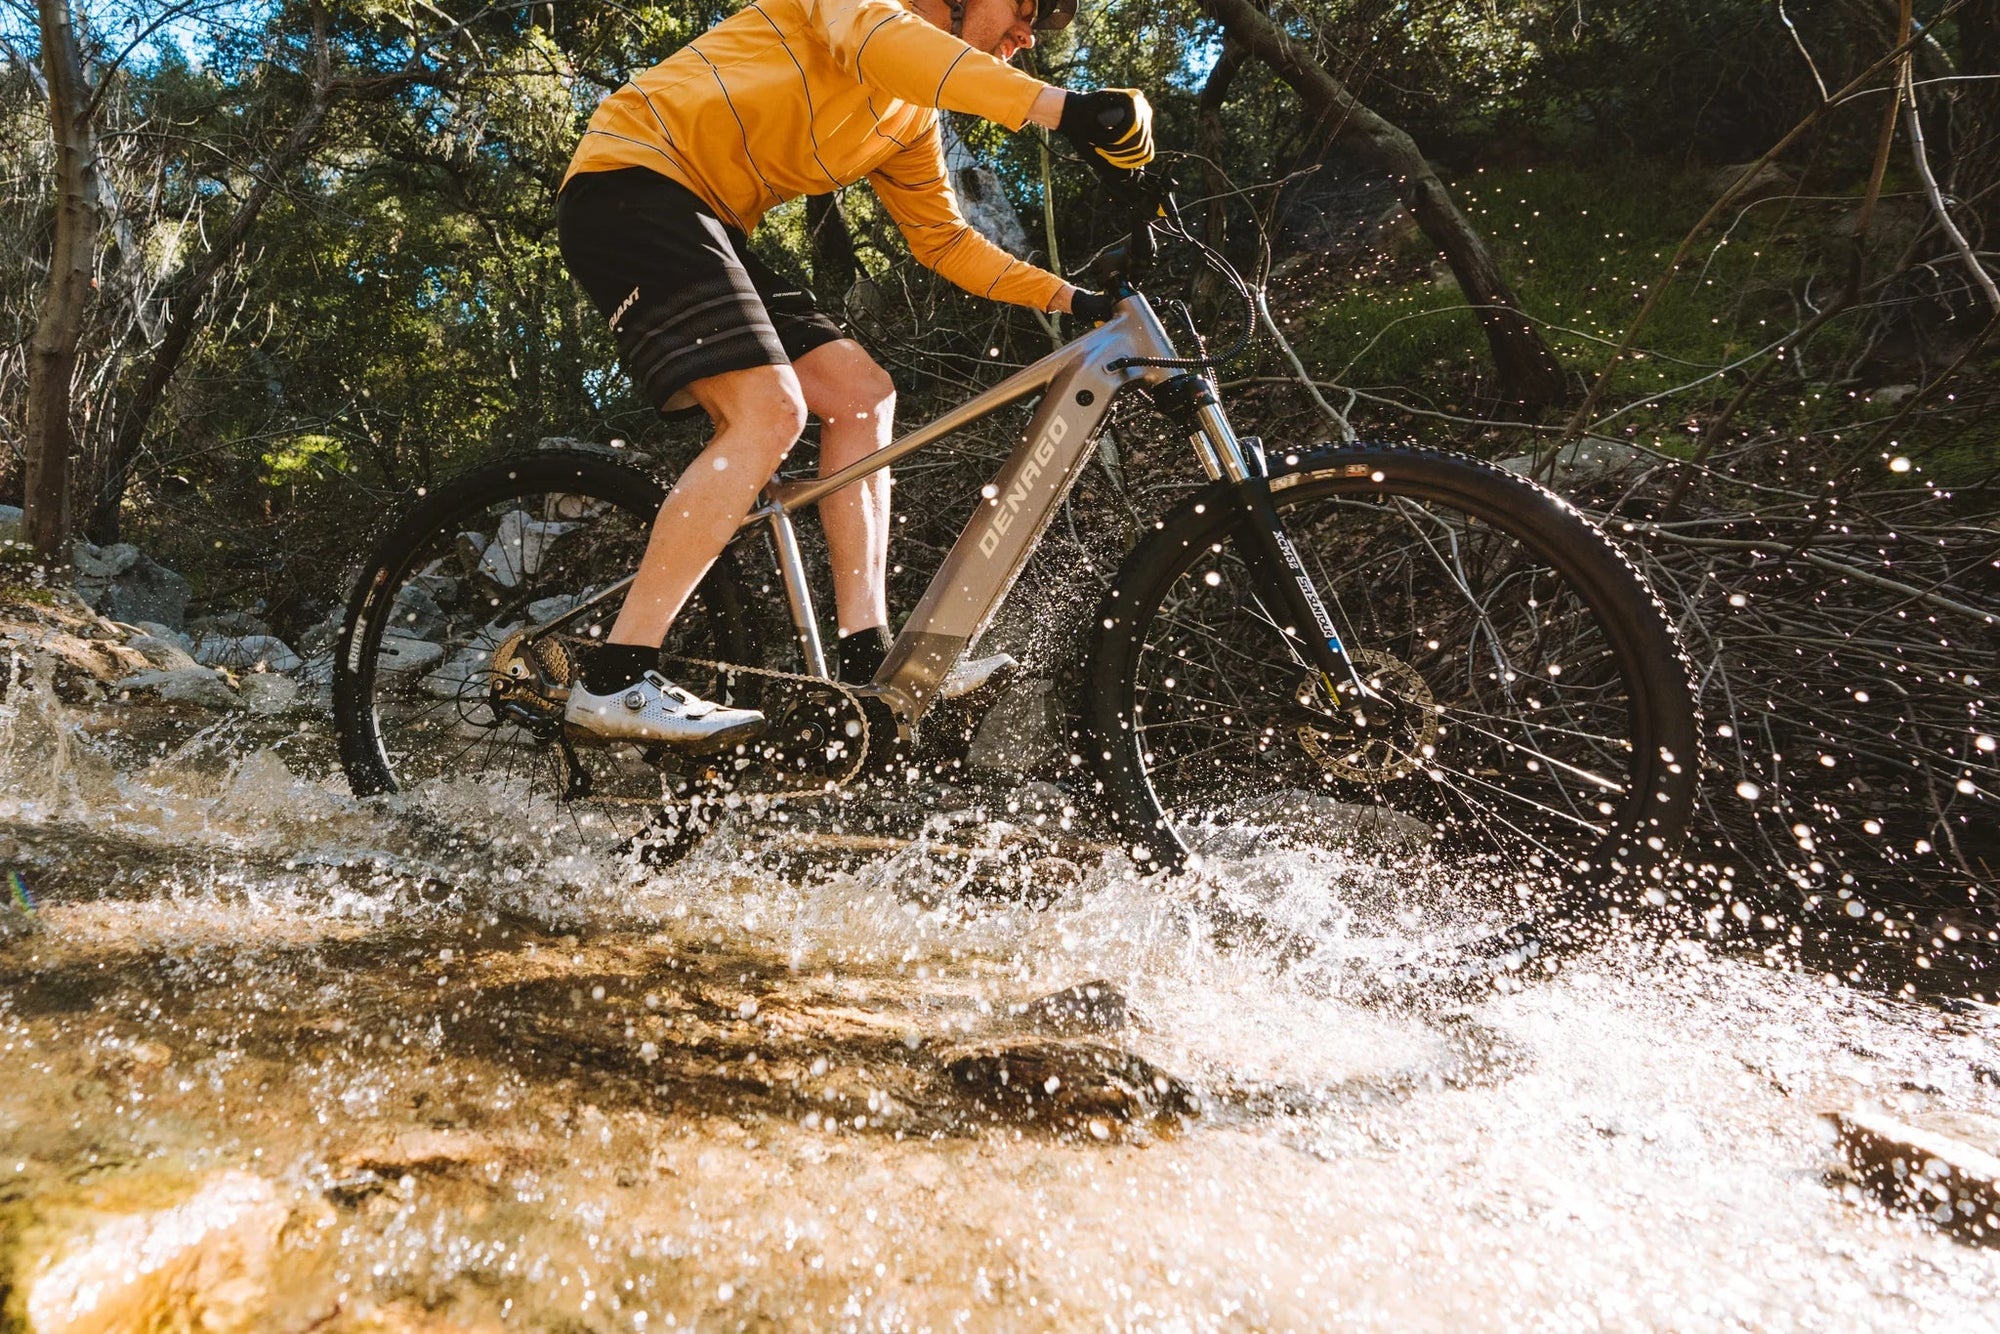 Big Wheels: Why 29” Wheels Are Great for Electric Mountain Bikes